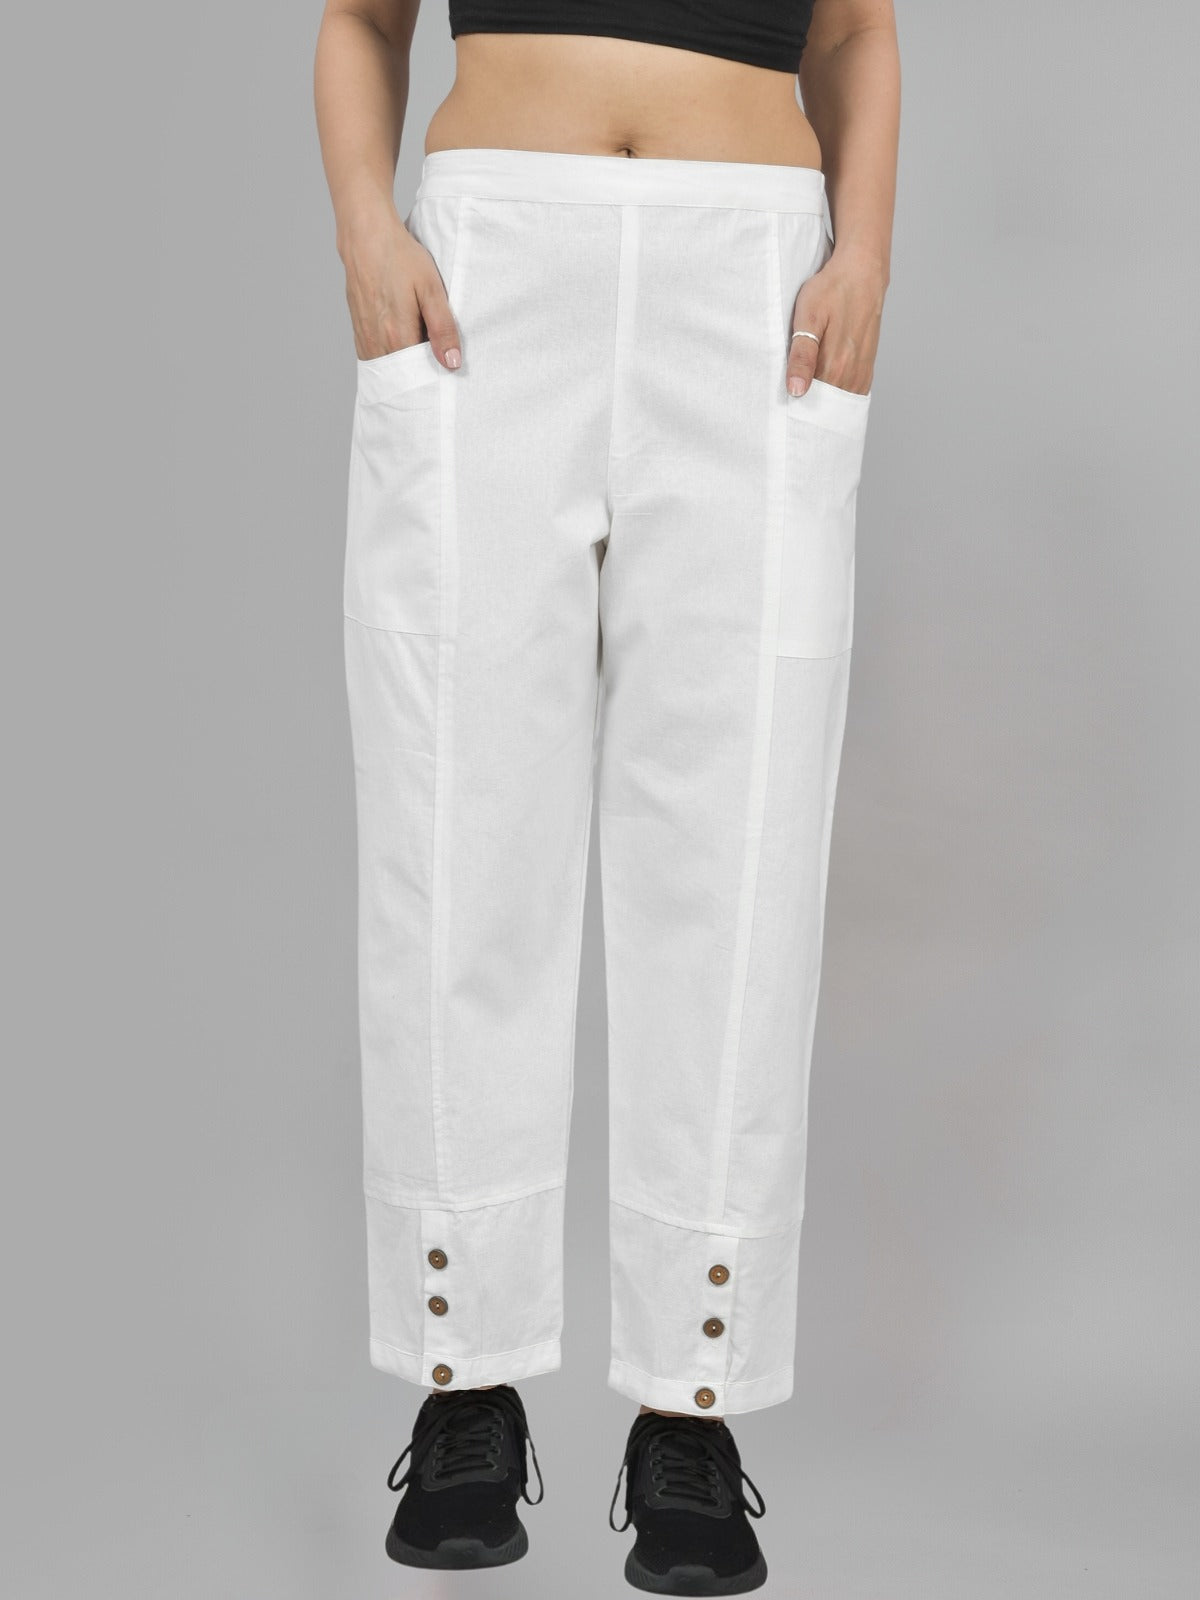 Combo Pack Of Womens White And Melange Grey Side Pocket Straight Cargo Pants